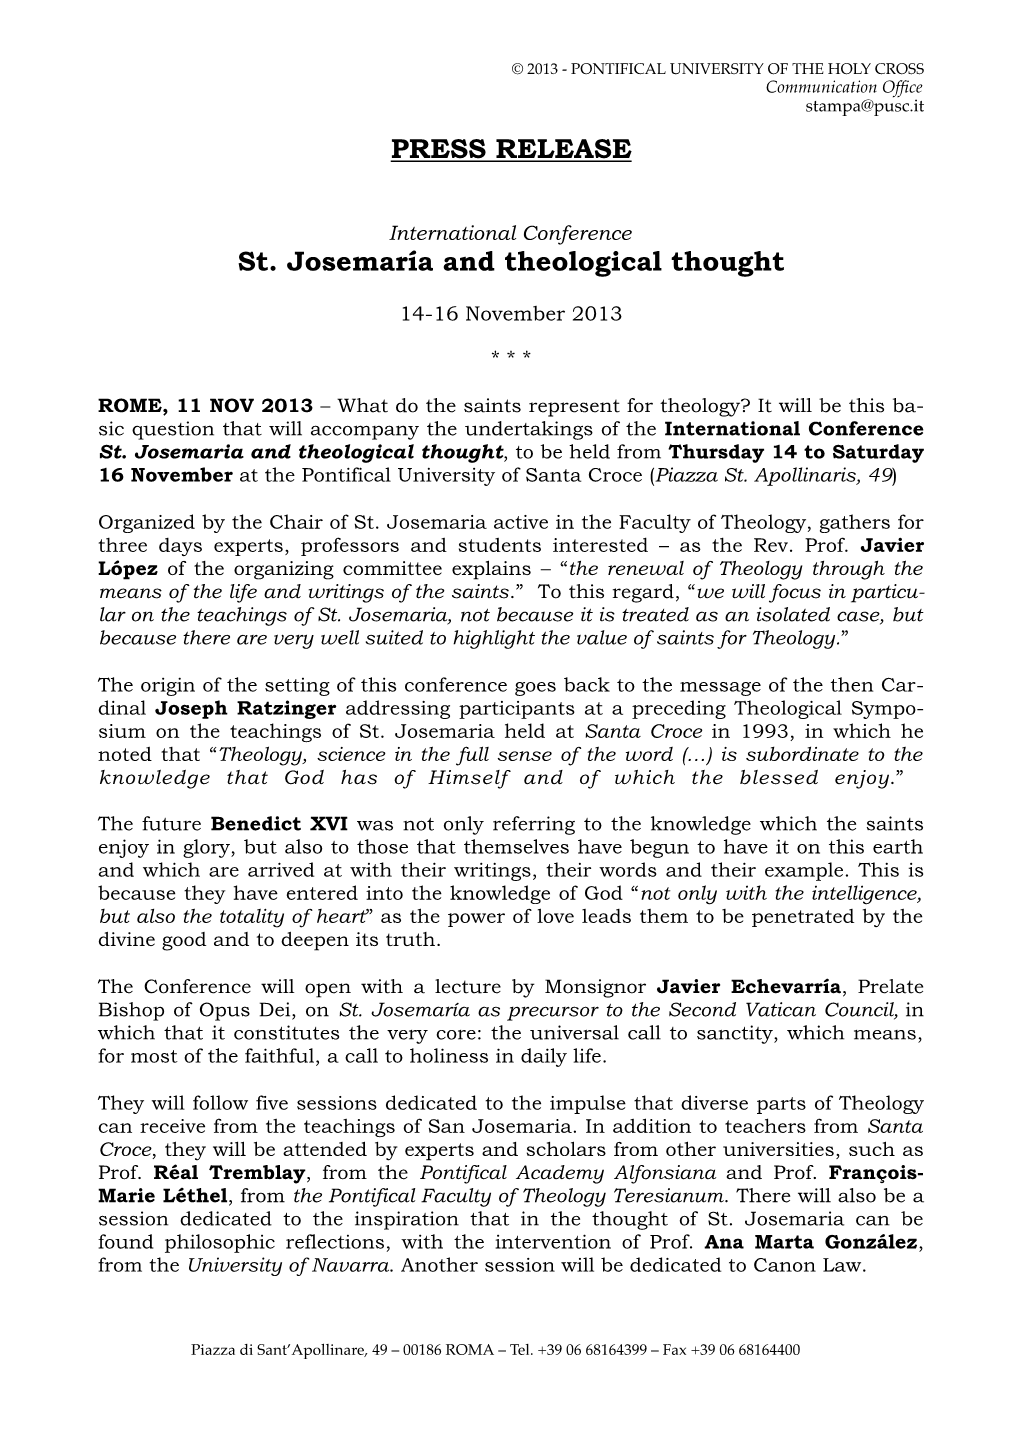 PRESS RELEASE St. Josemaría and Theological Thought